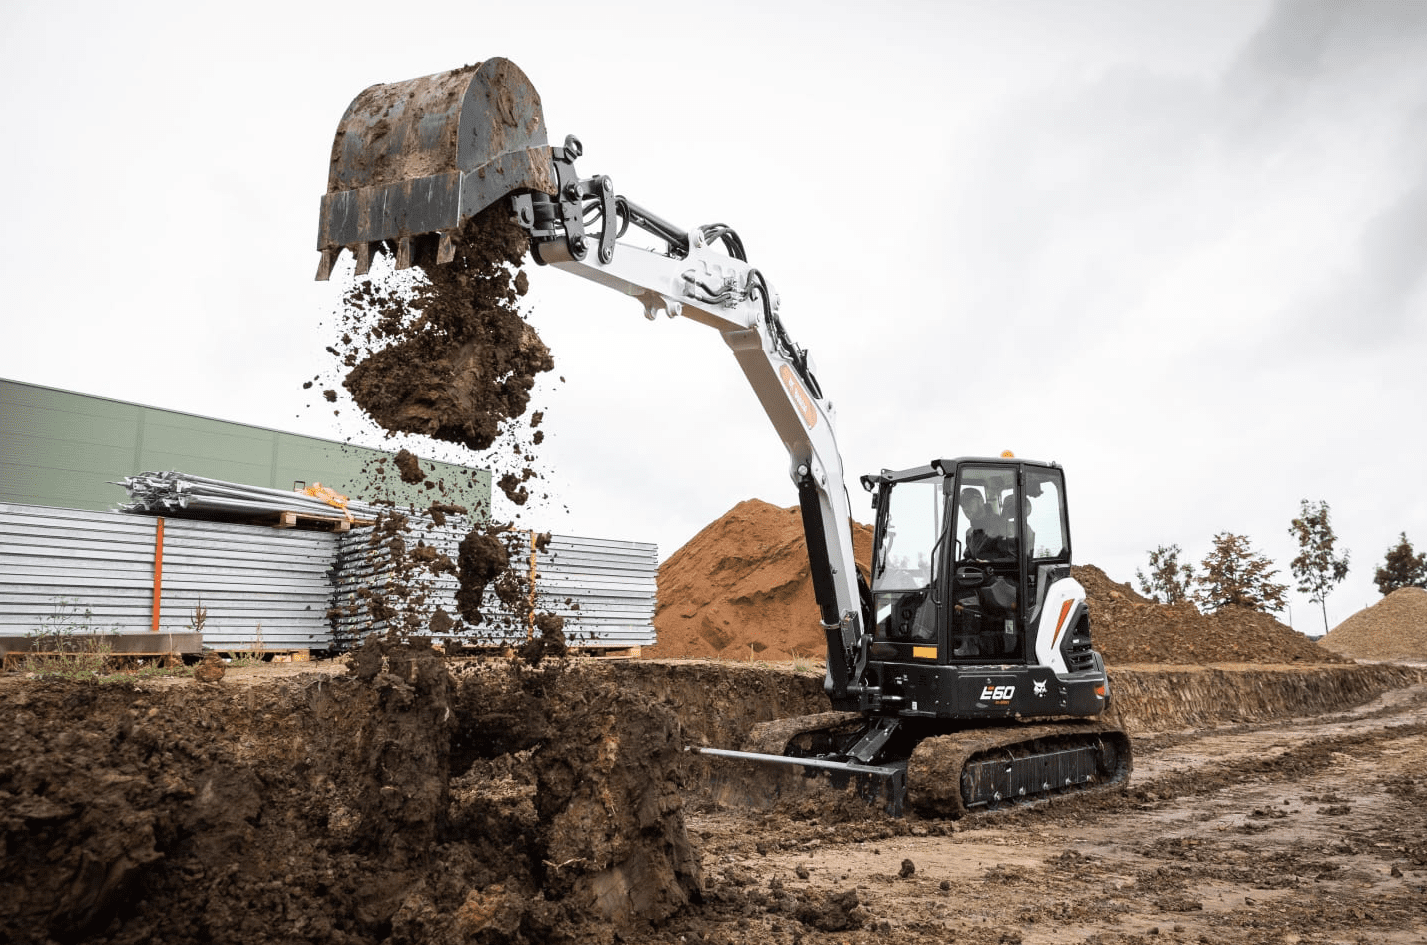 Browse Specs and more for the E60 Compact Excavator - Bobcat of the Rockies